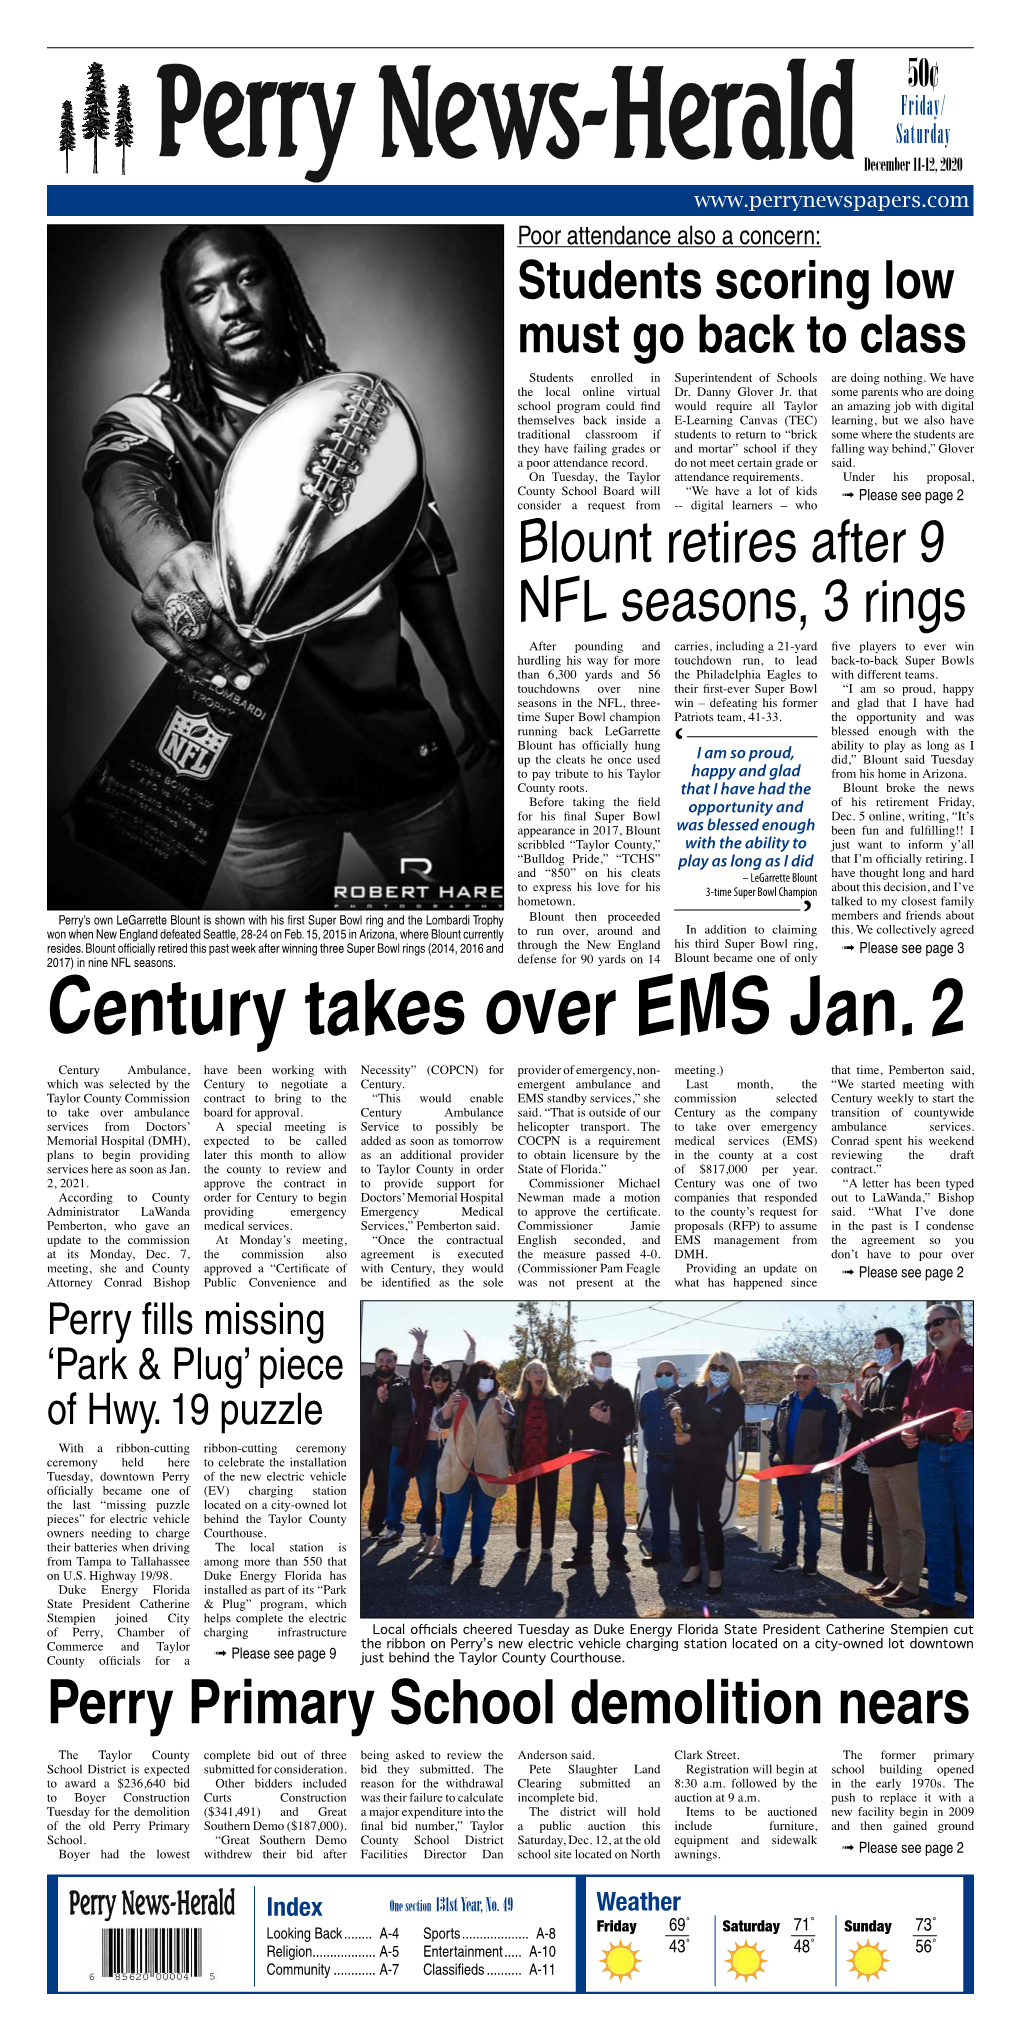 Century Takes Over EMS Jan. 2